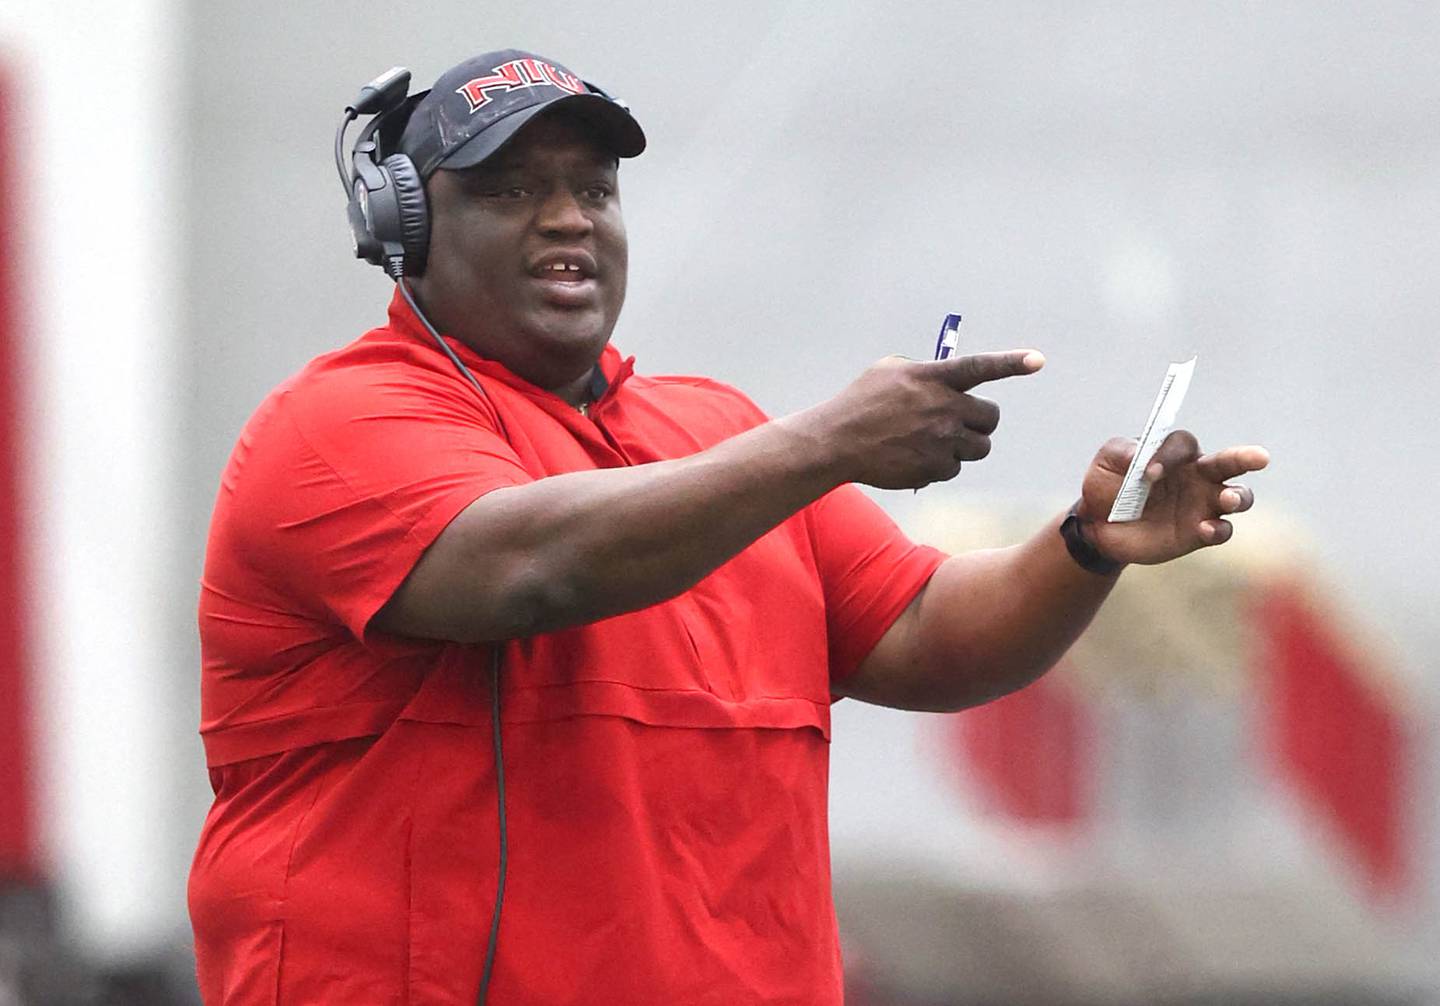 Northern Illinois University football head coach Thomas Hammock gives instruction during spring practice Wednesday, April 6, 2022, in the Chessick Practice Center at NIU in DeKalb.